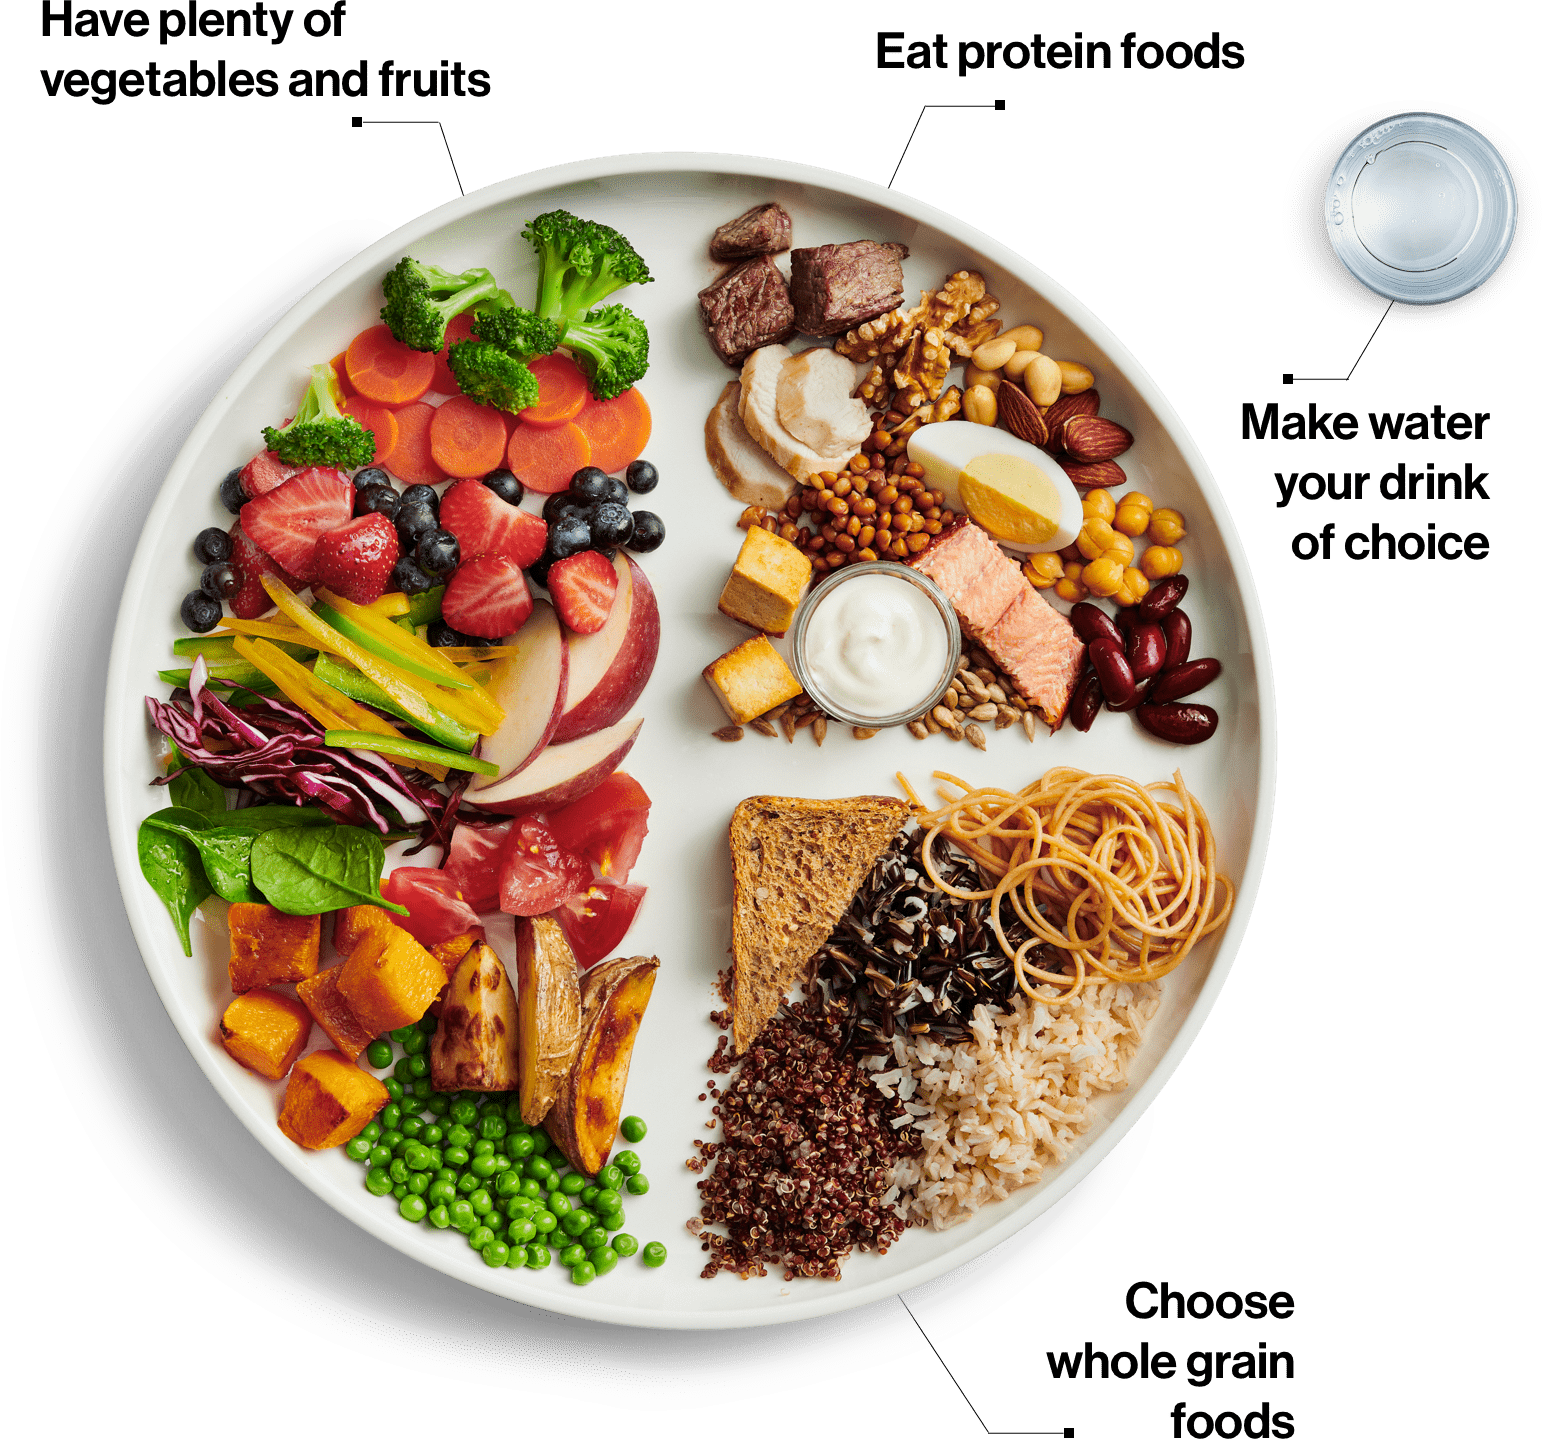 New food guide encourages healthy eating — the university clearly does not